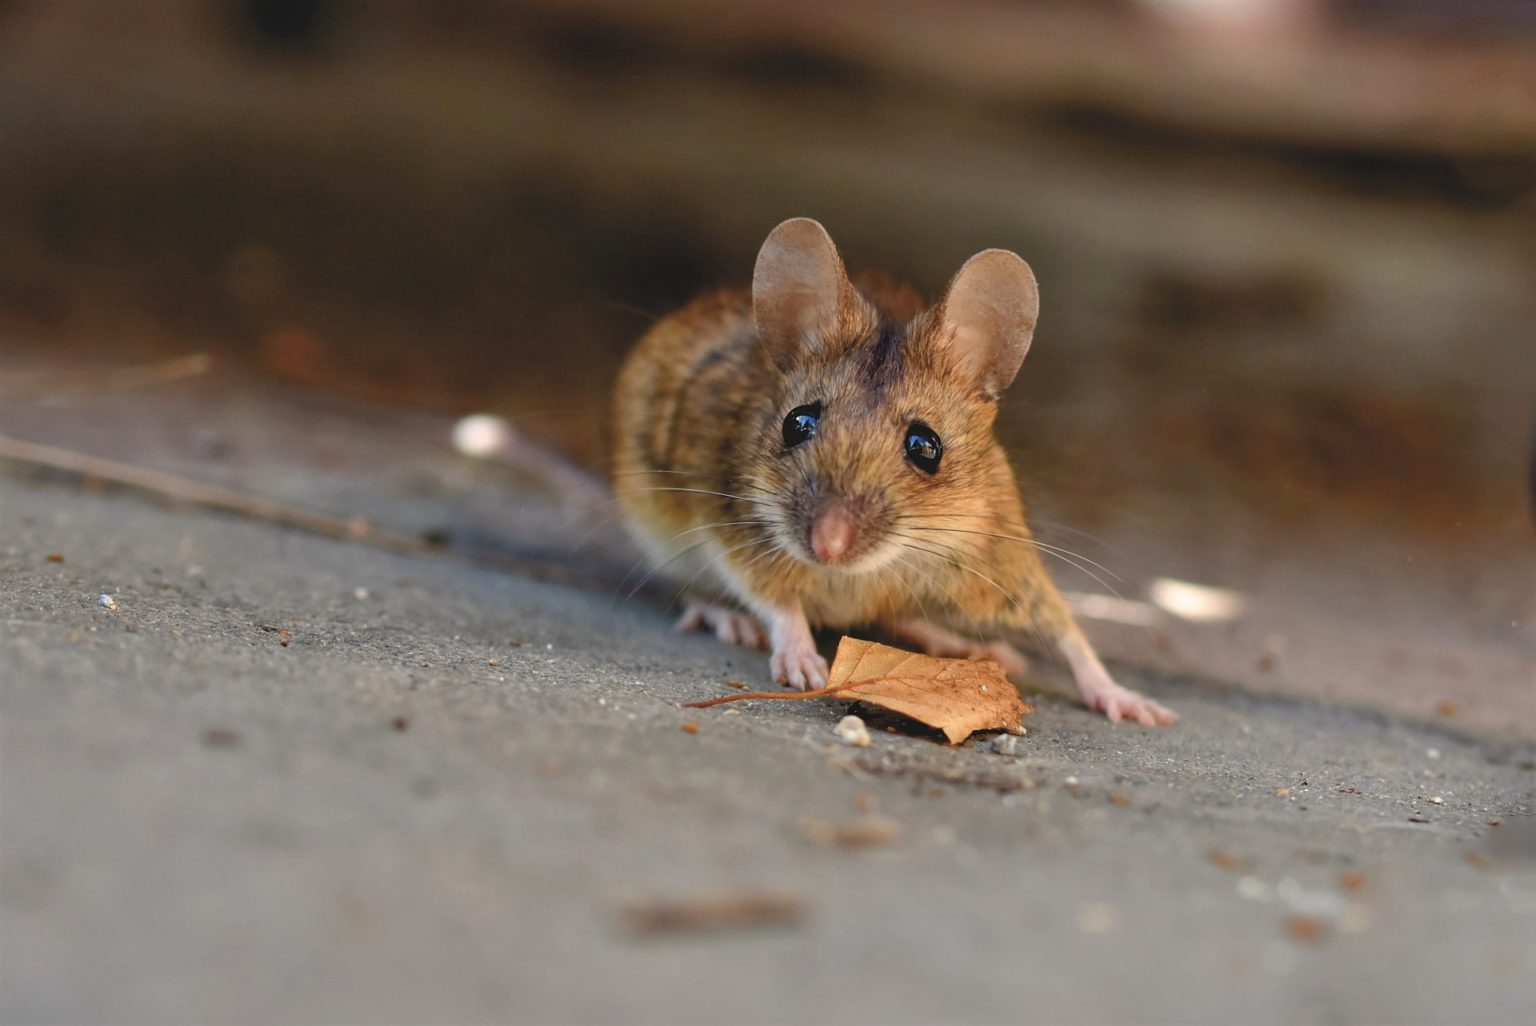 How To Get Mice Out Of Your Home Effectively